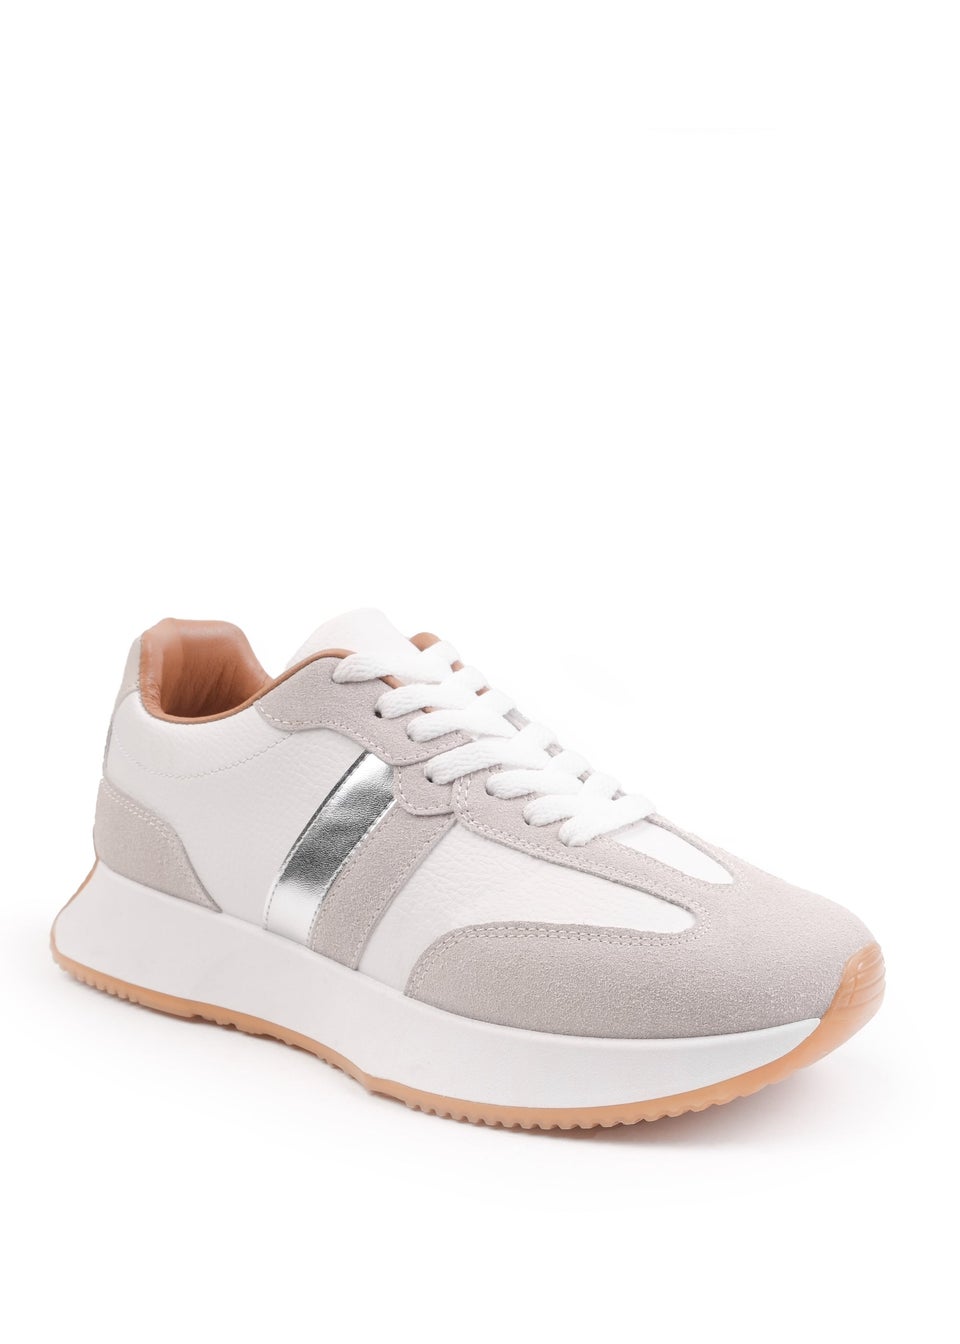 Where's That From White PU Pulse Runner Trainers